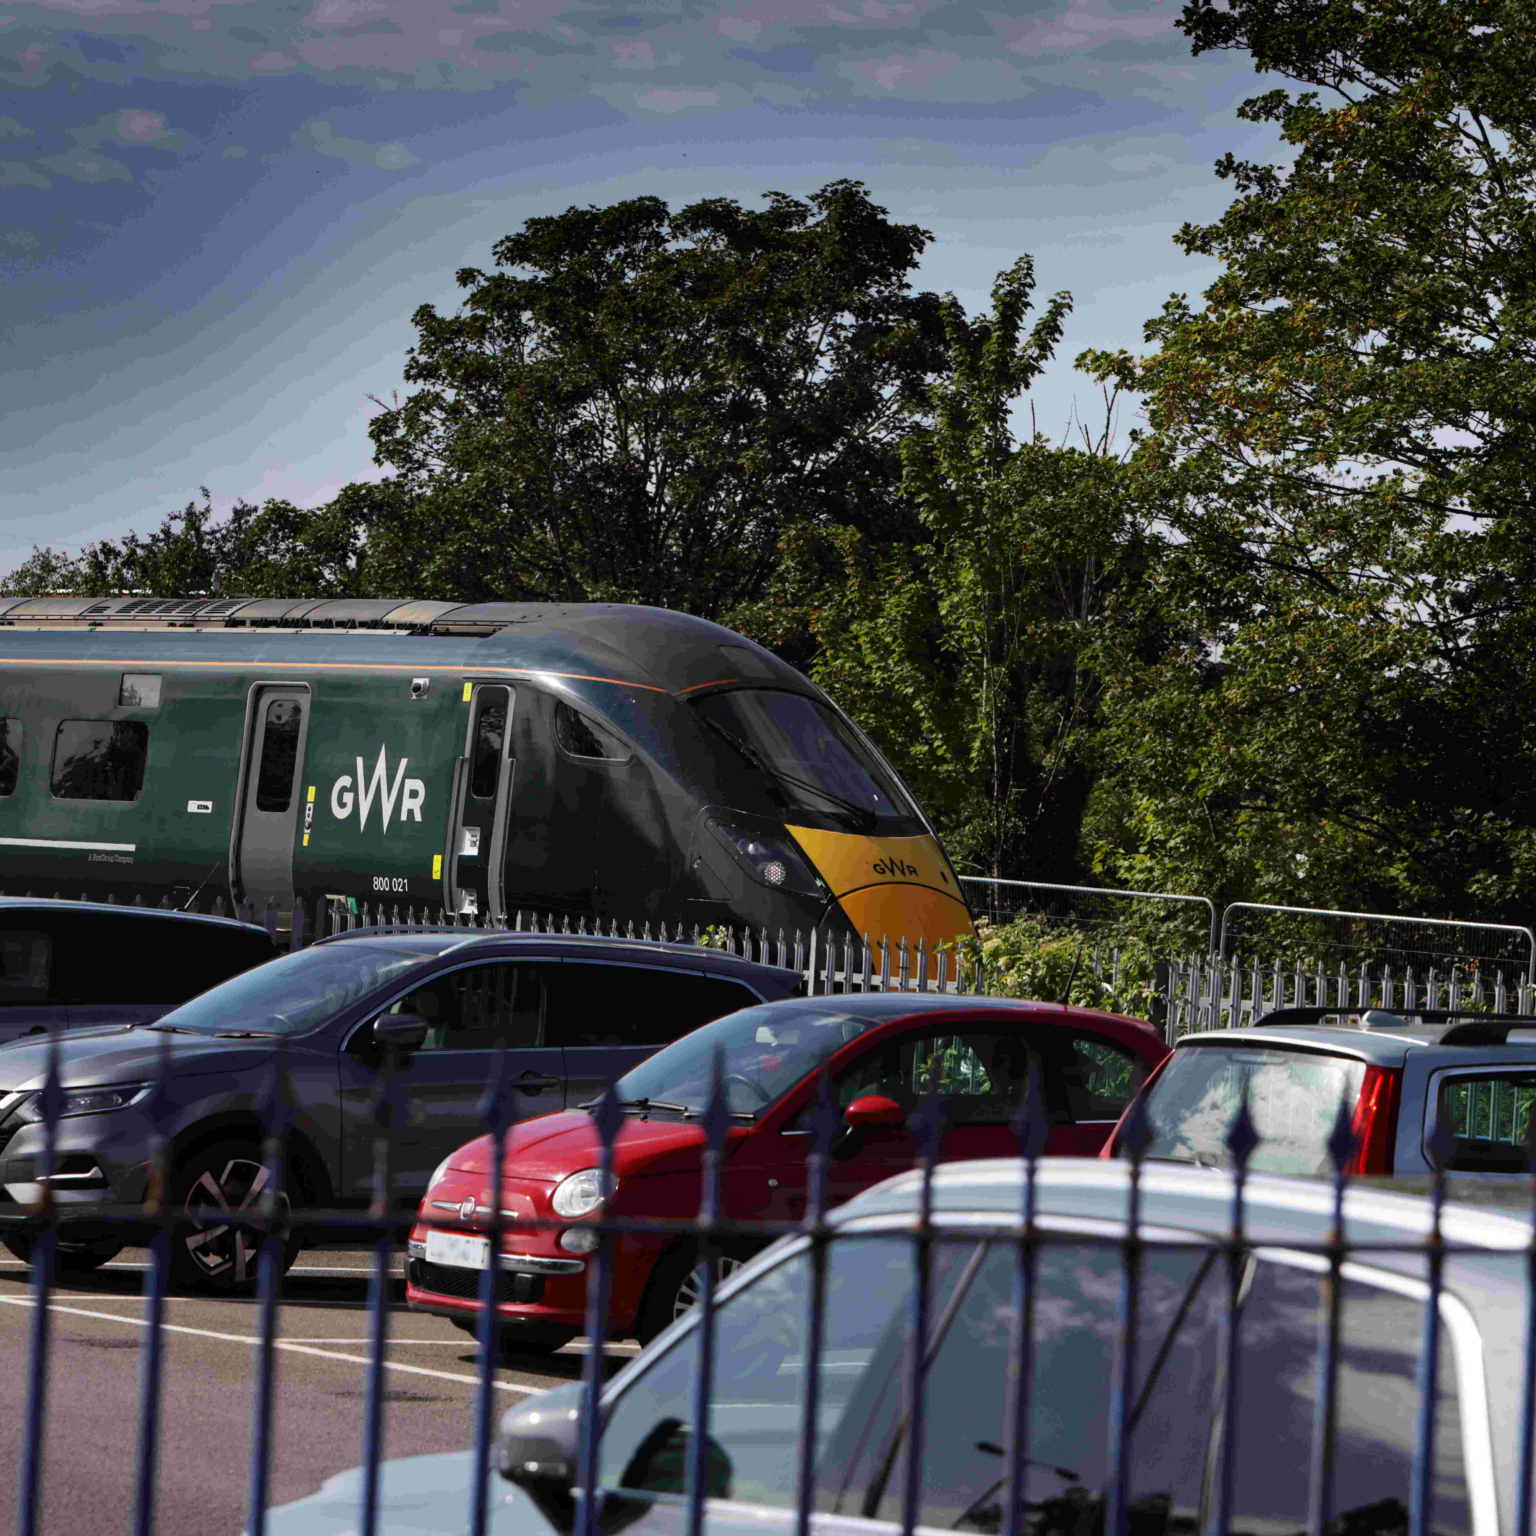 a train pulling into Oxford Station behind the car park